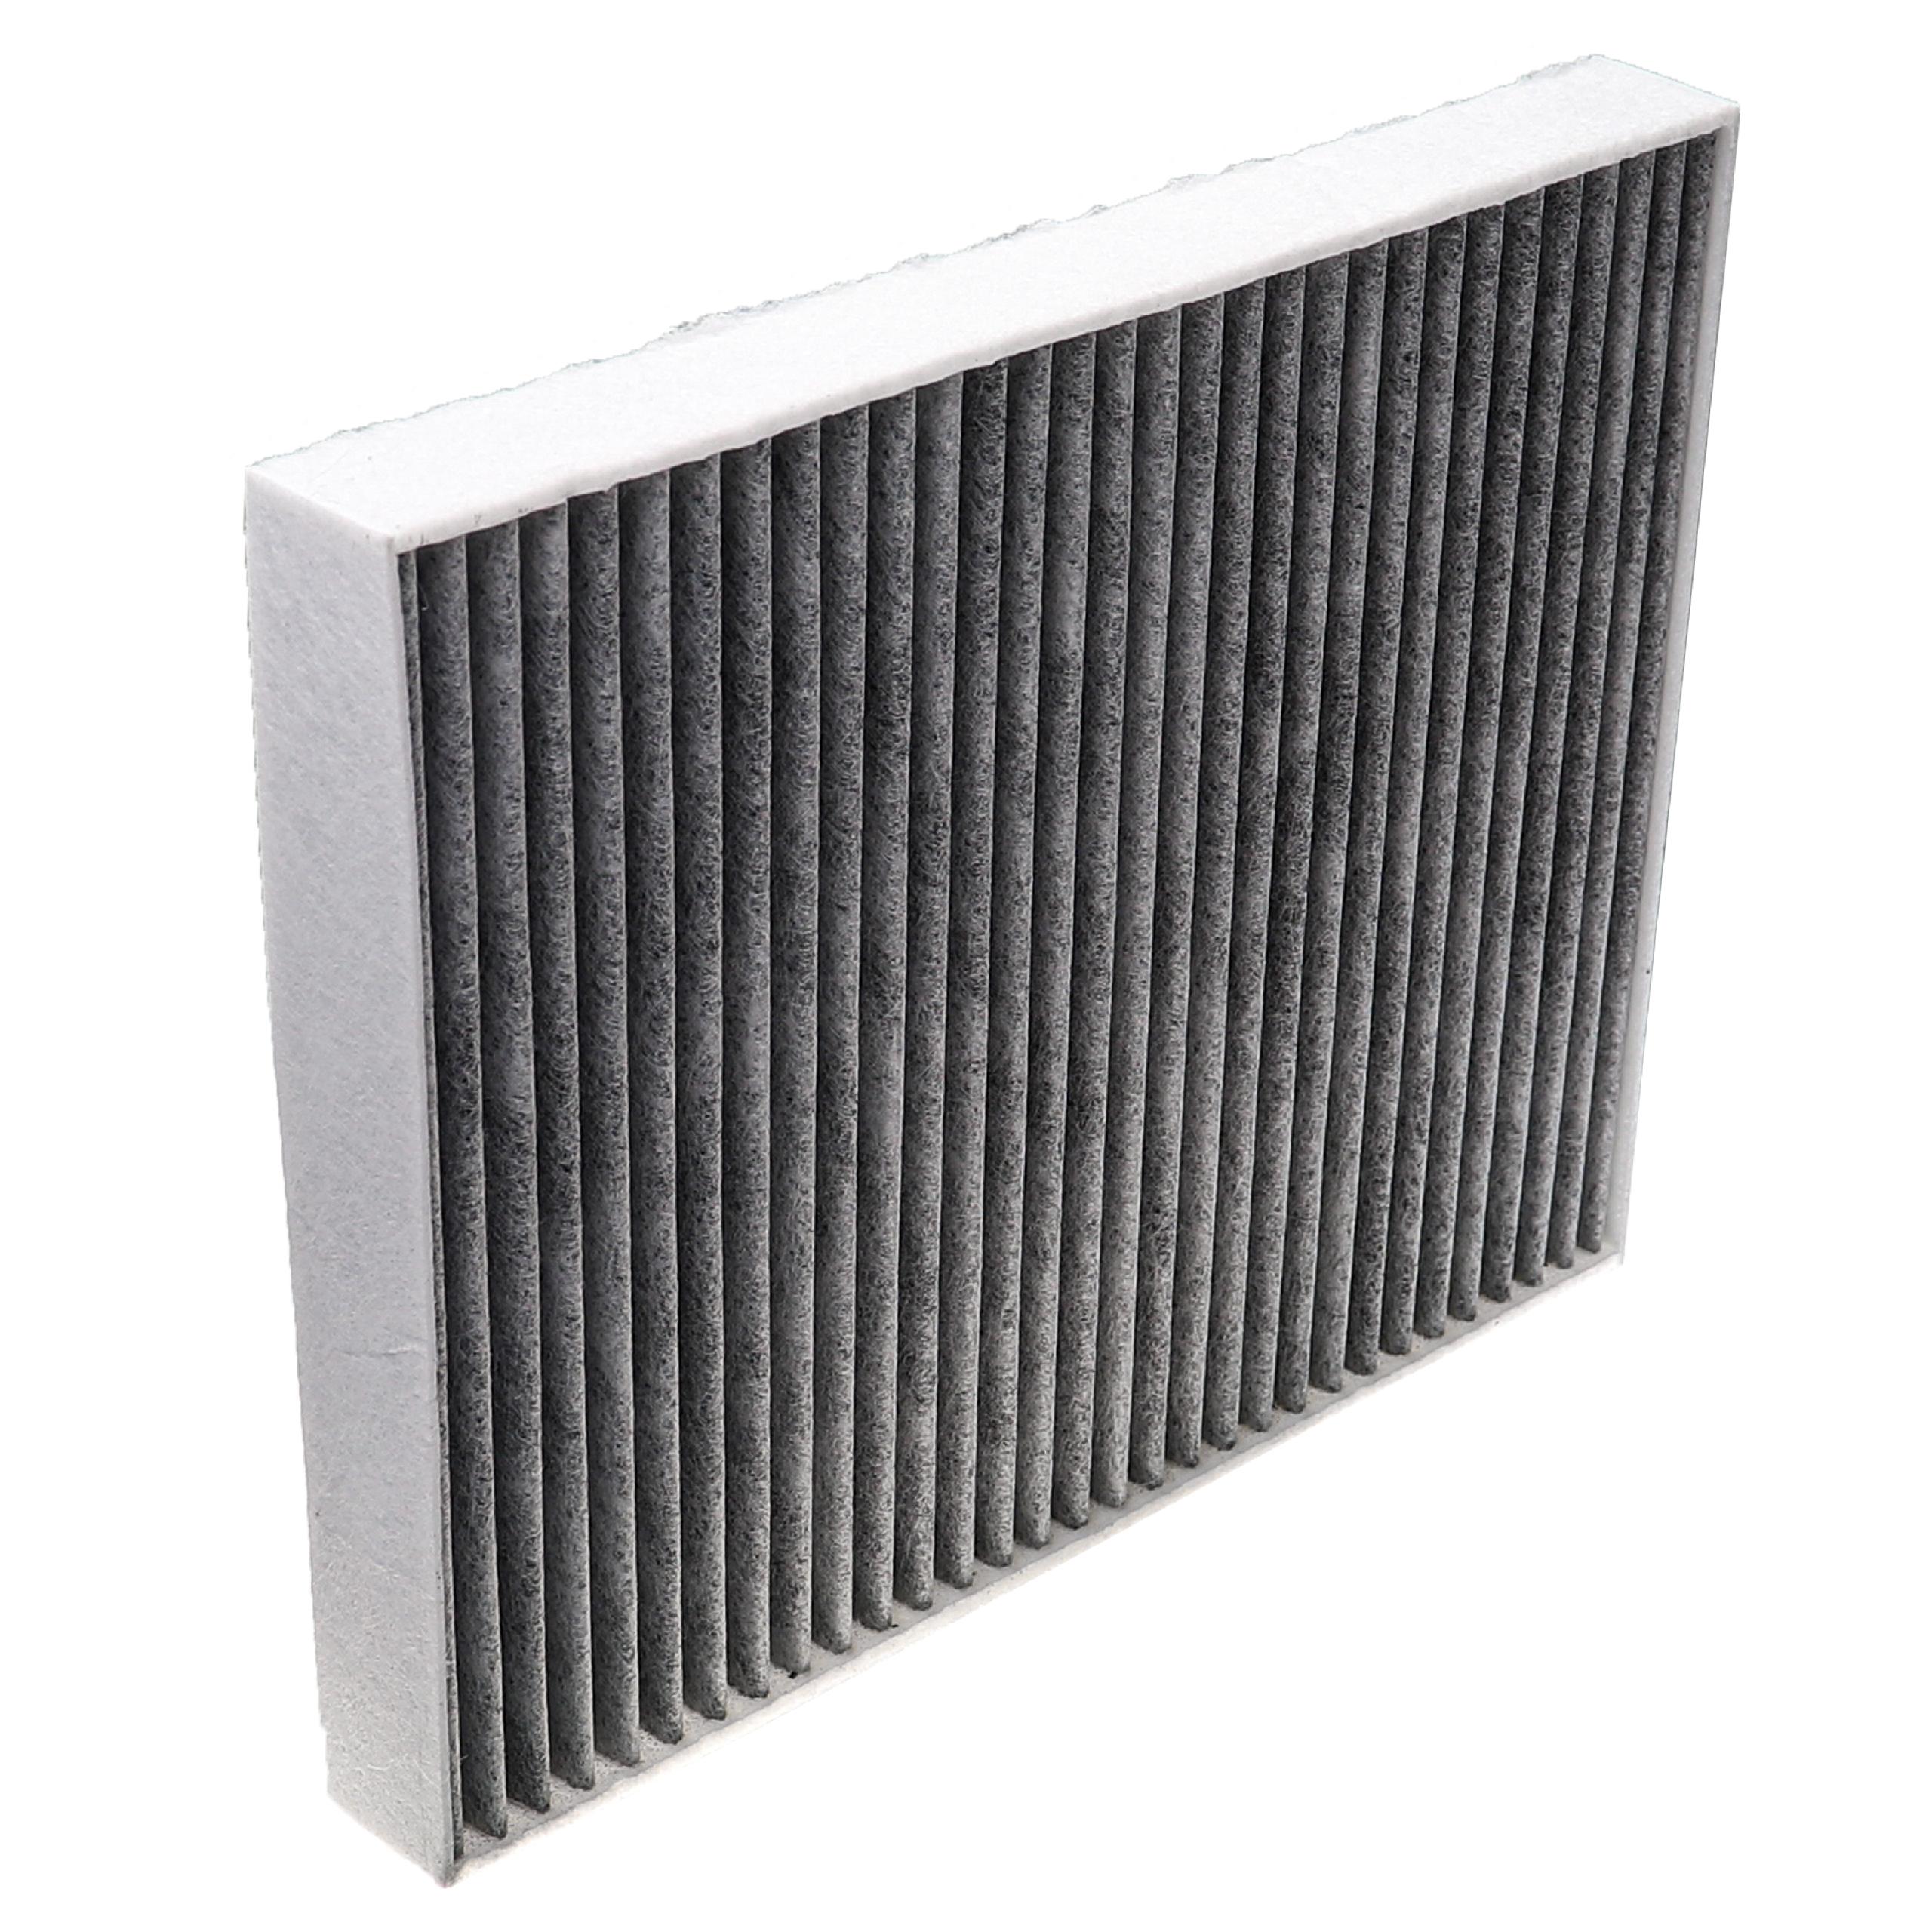 Cabin Air Filter replaces 1A First Automotive C30218 etc.